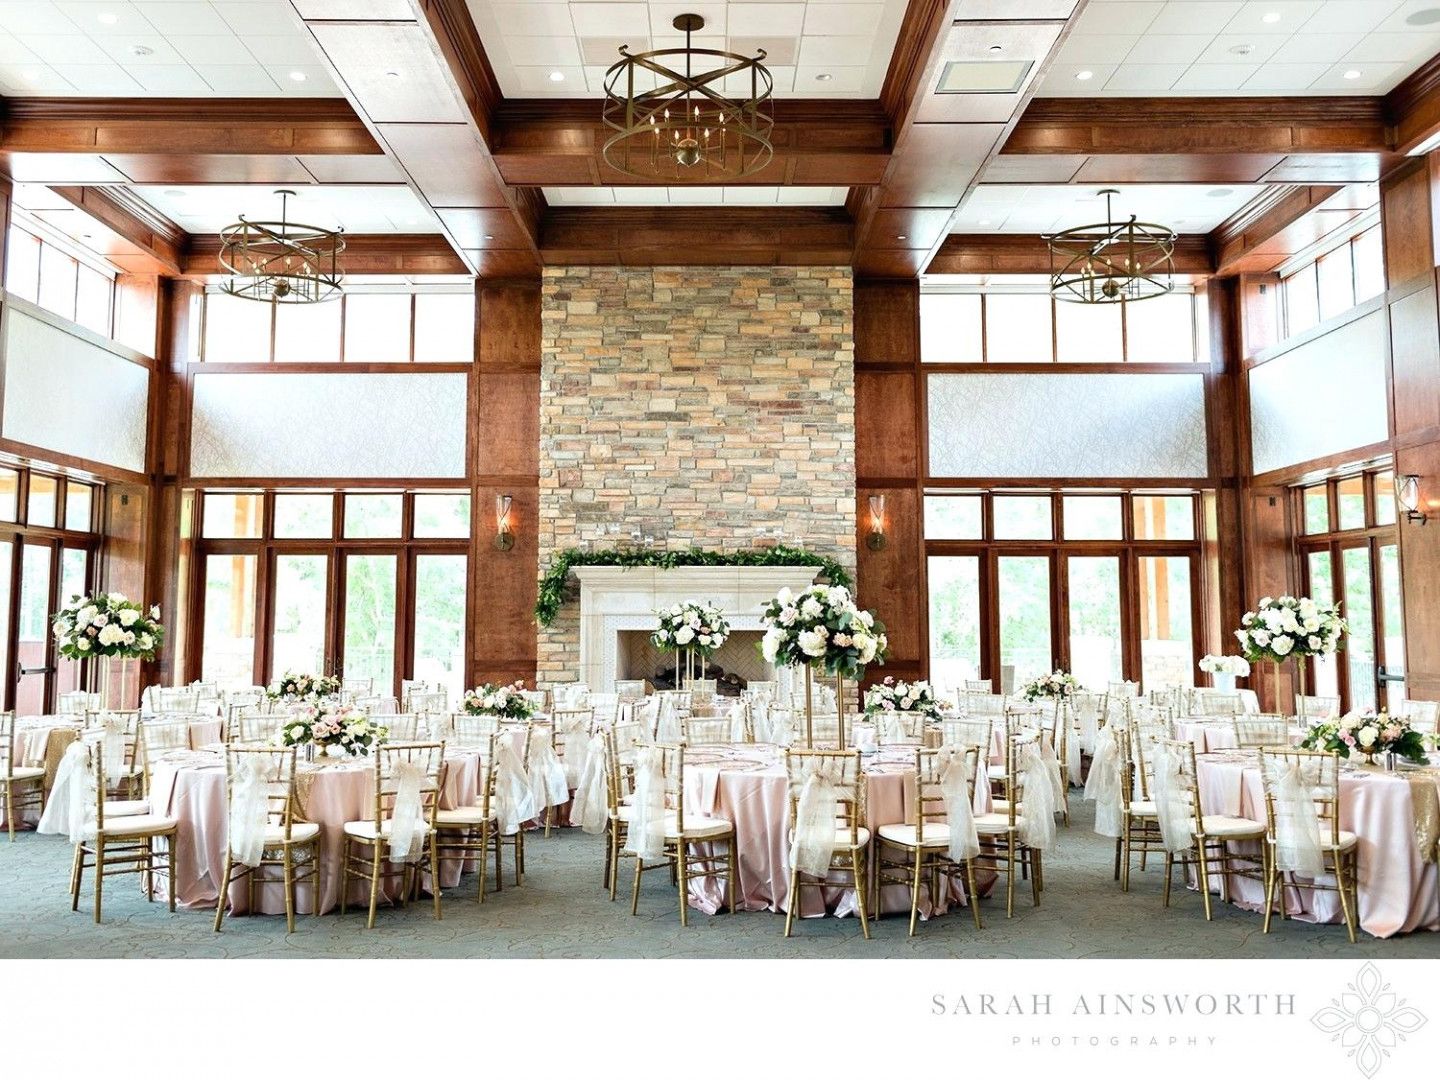 9 Things You Should Do In Cheap Wedding Venues In Houston ...